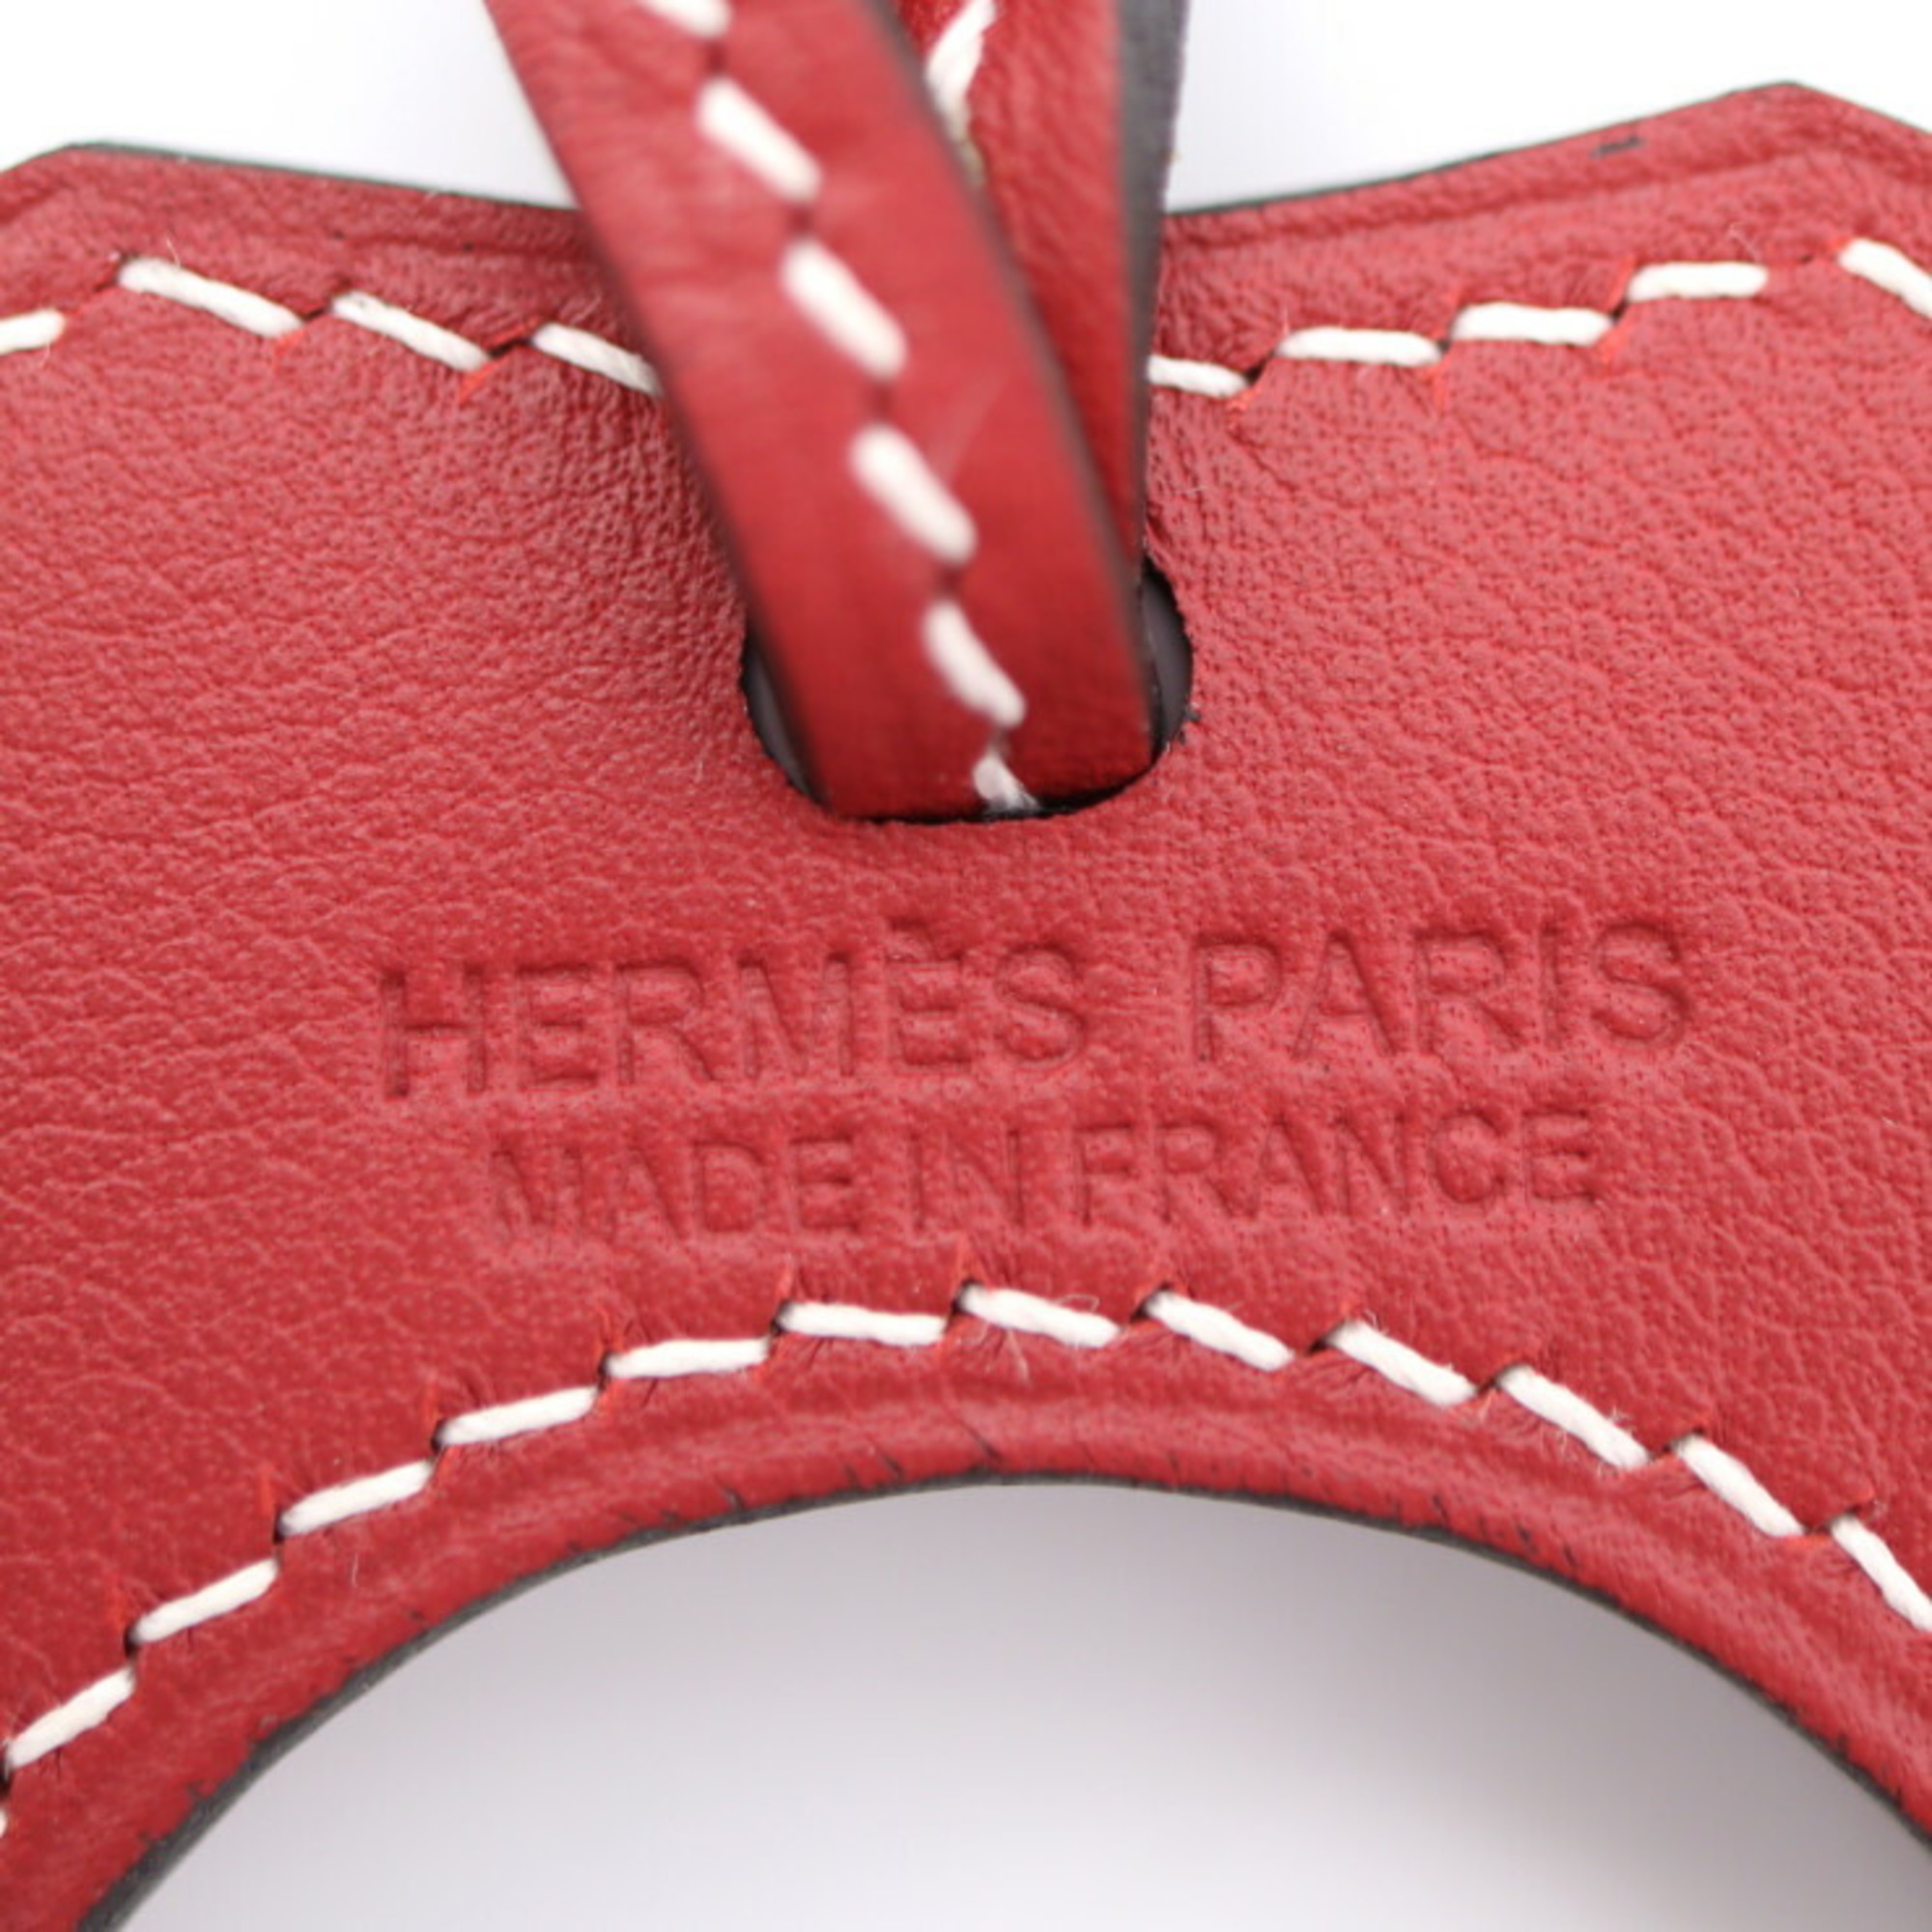 HERMES Paddock Faire a Cheval Other Accessories Vaux Swift Rouge Grena Bag Charm Horseshoe